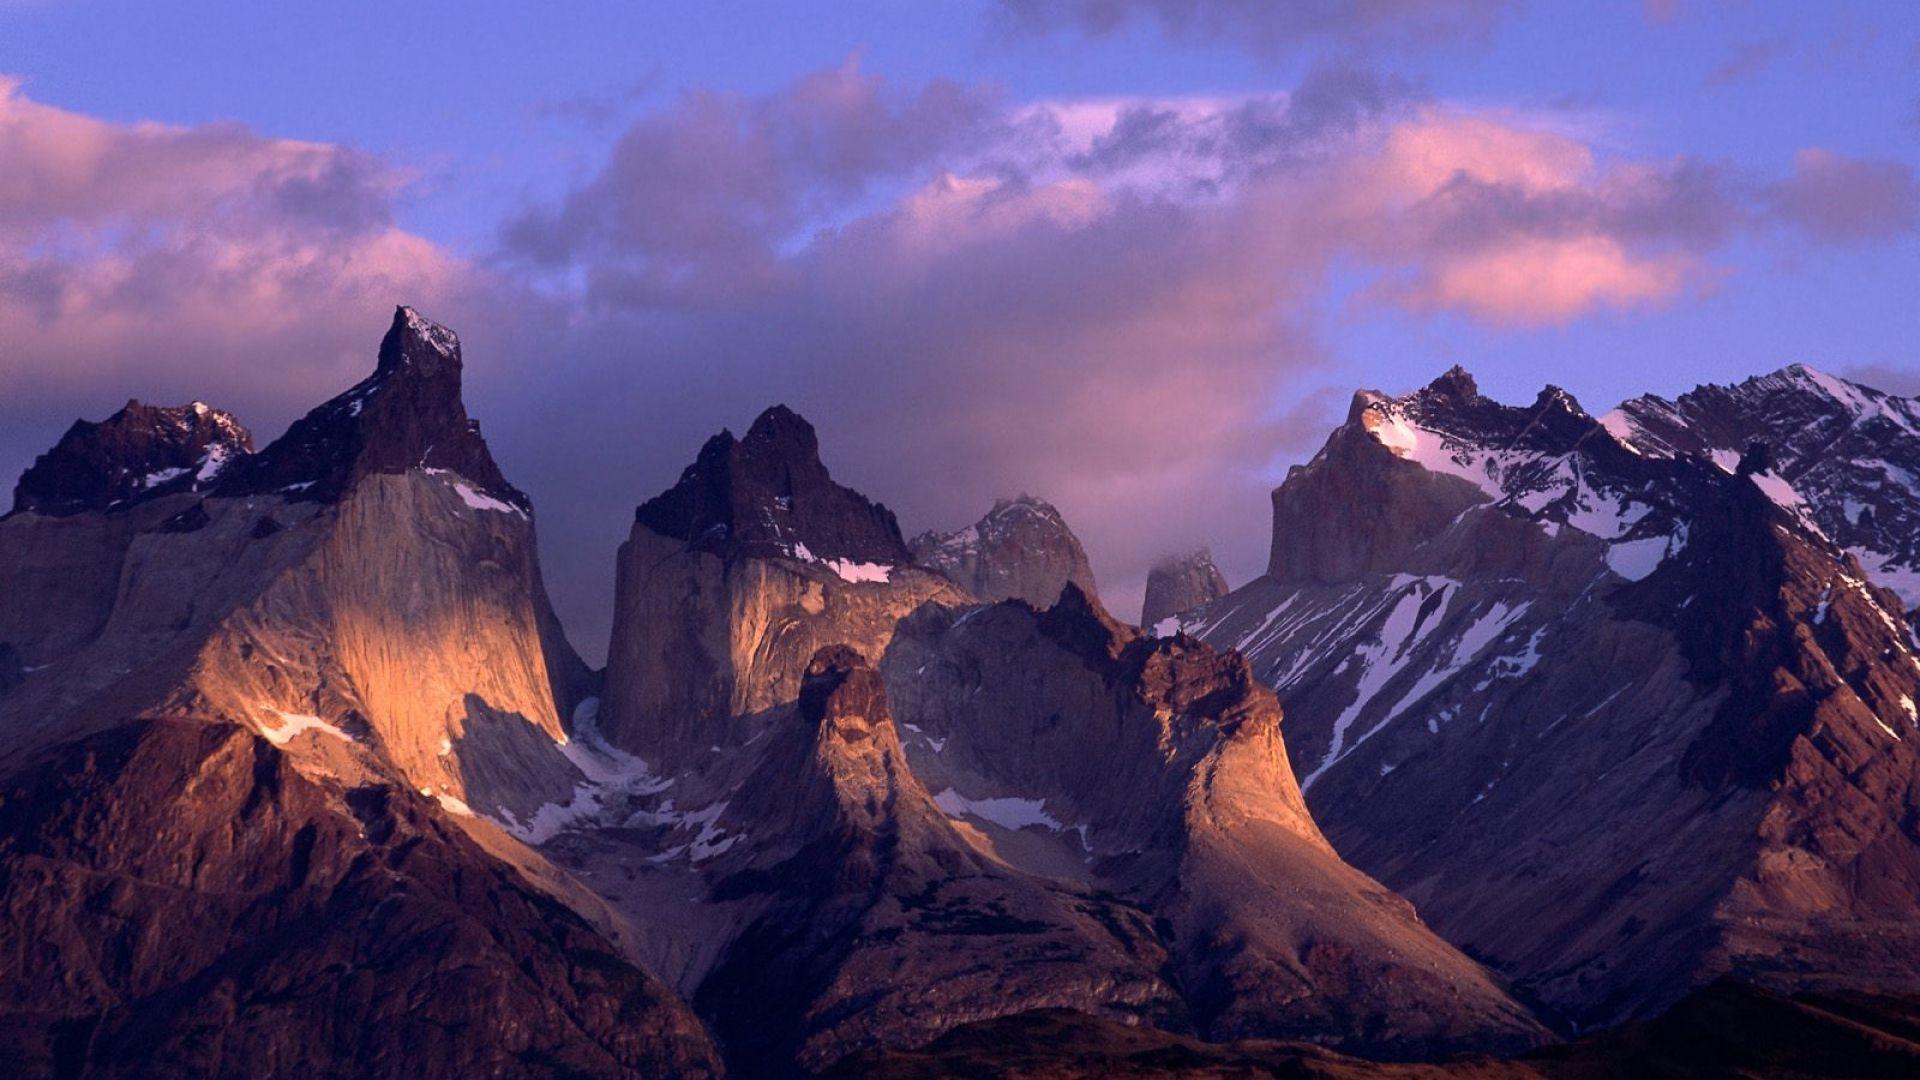 Download Wallpaper 1920x1080 cuernos del paine, andes, chile